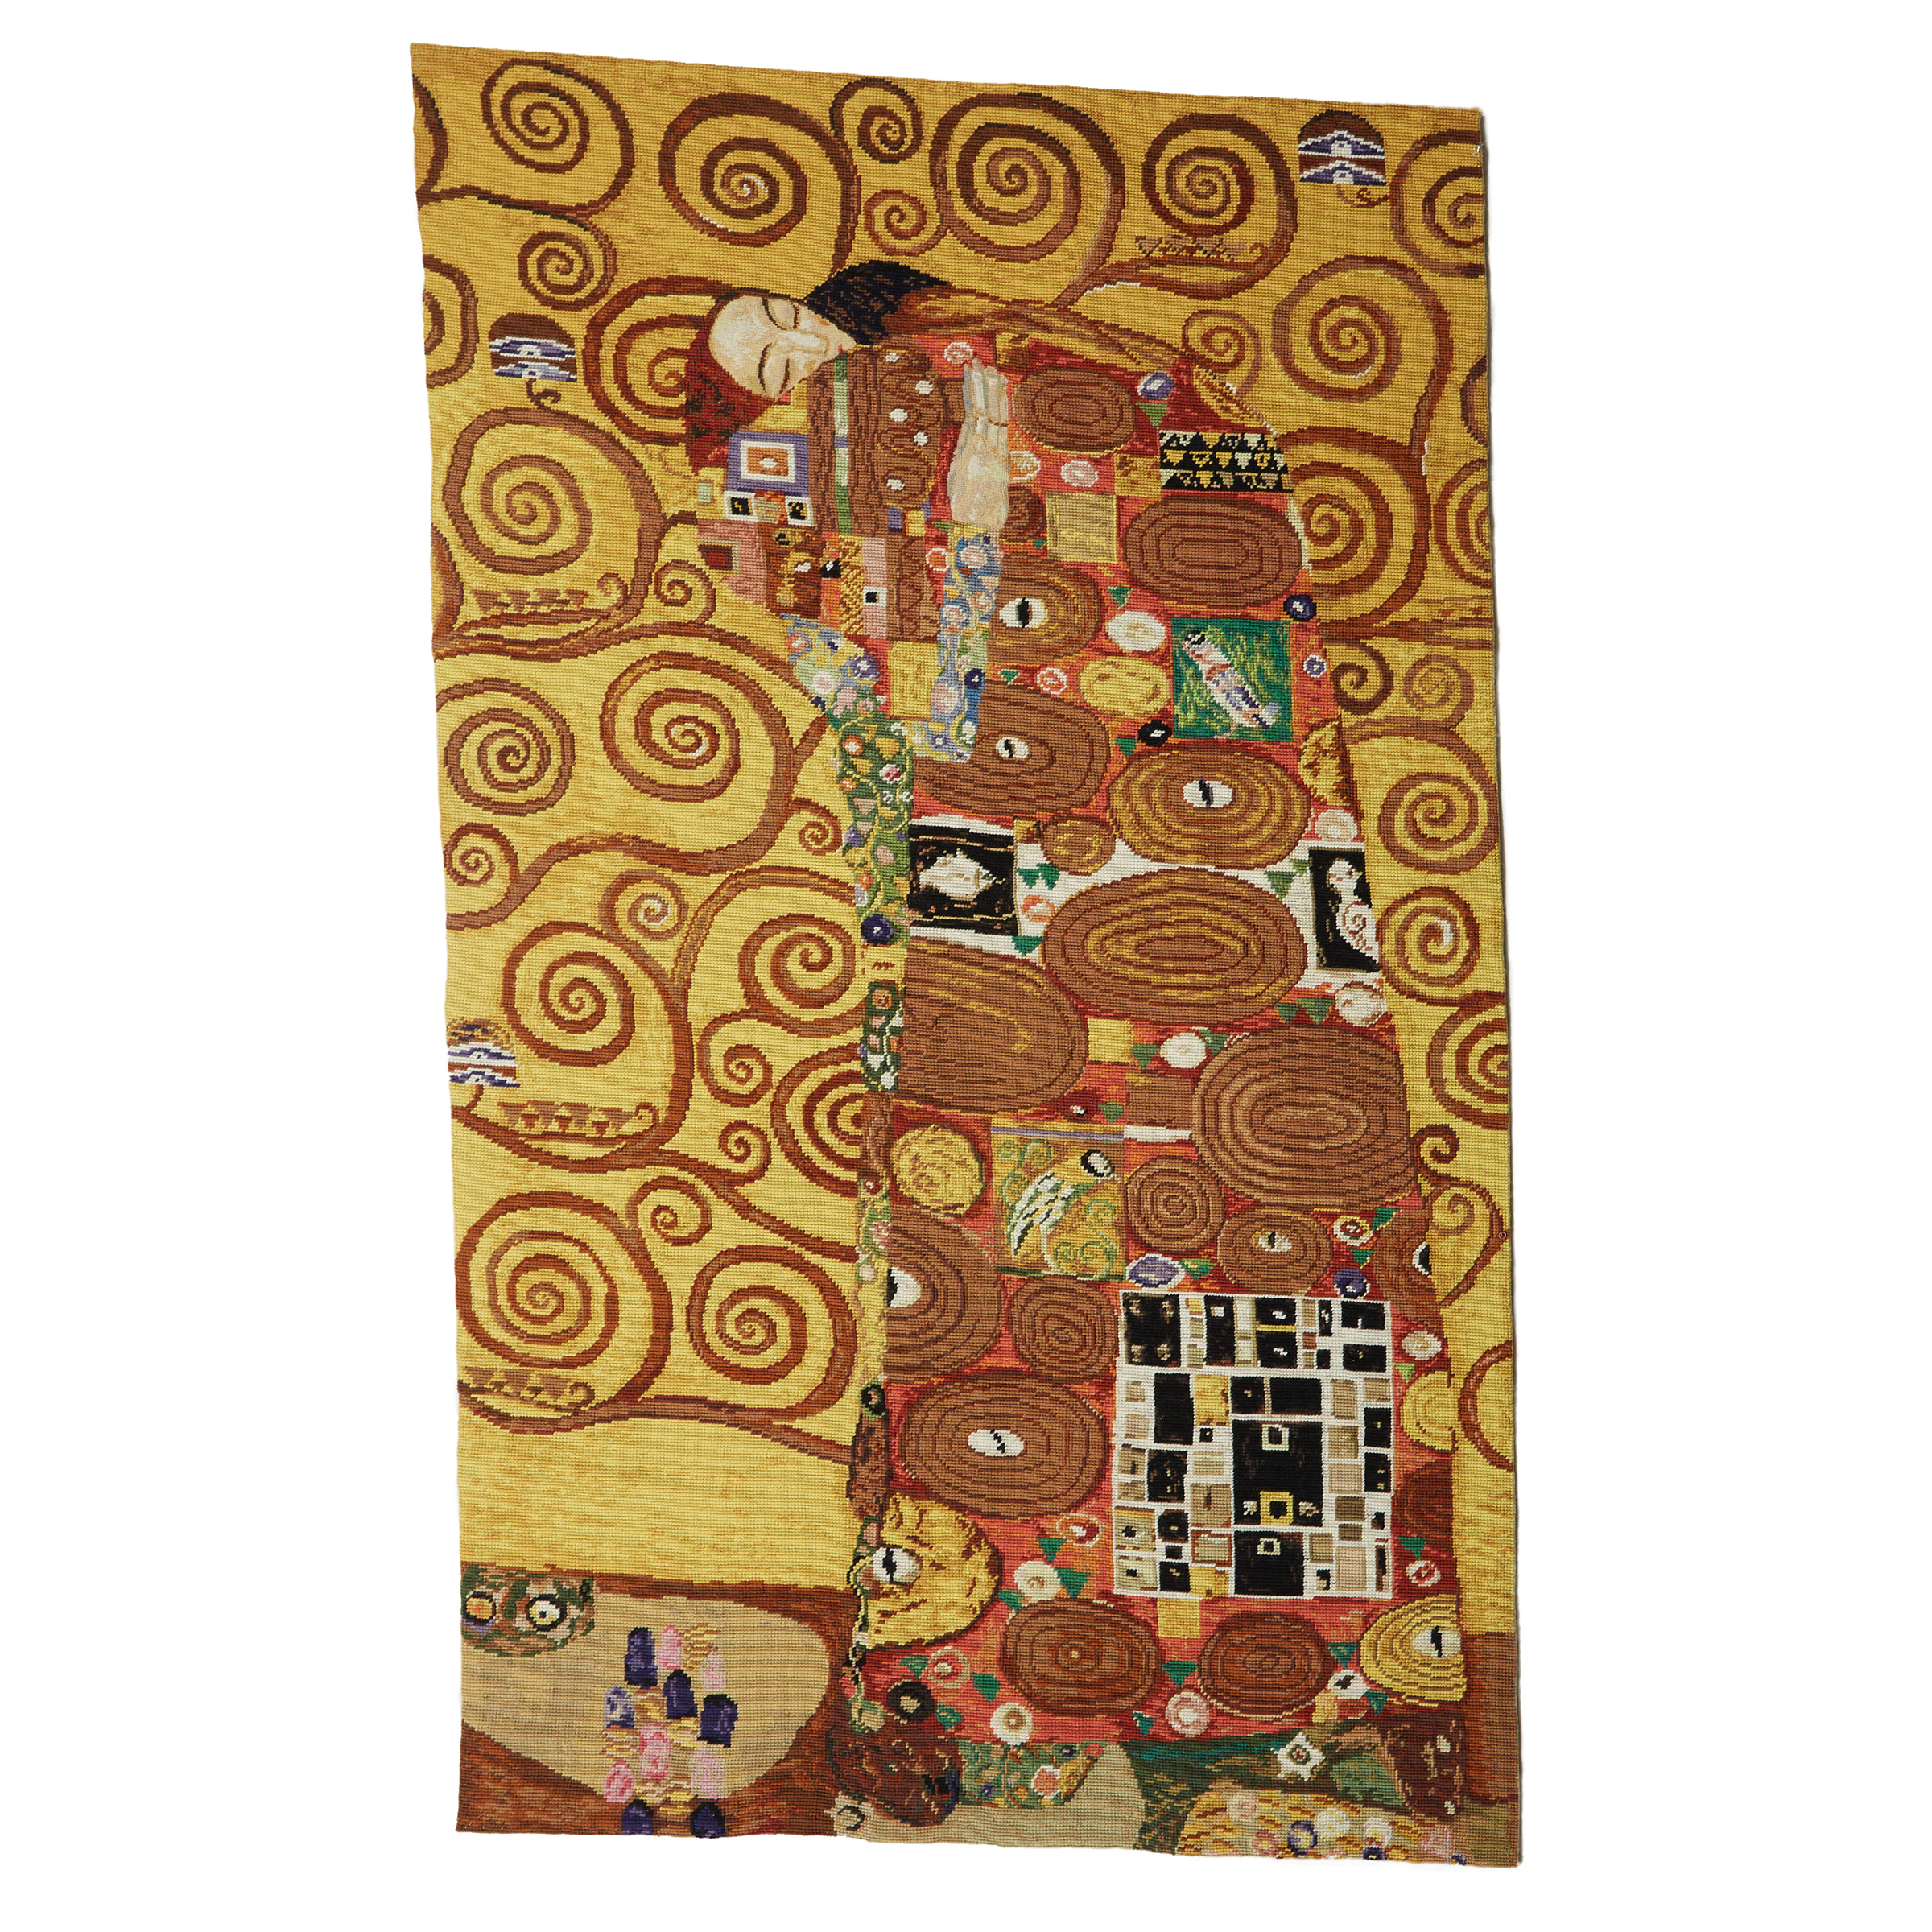 French Needlepoint Textile After Gustav Klimt’s “The Kiss”